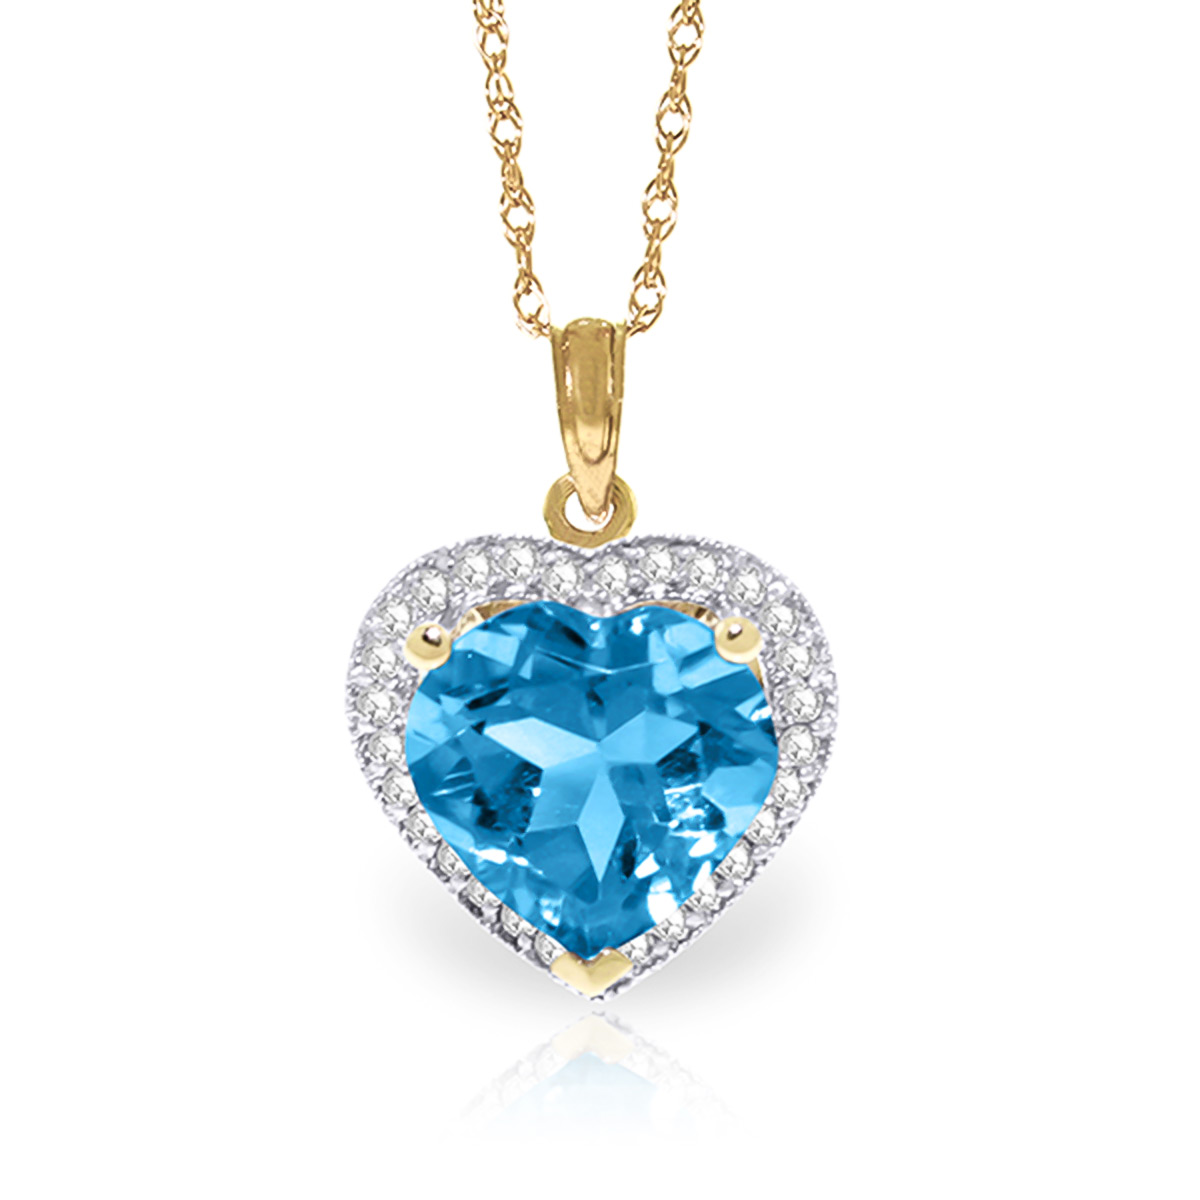 Blue Topaz Halo Pendant Necklace 6.44 ctw in 9ct Gold